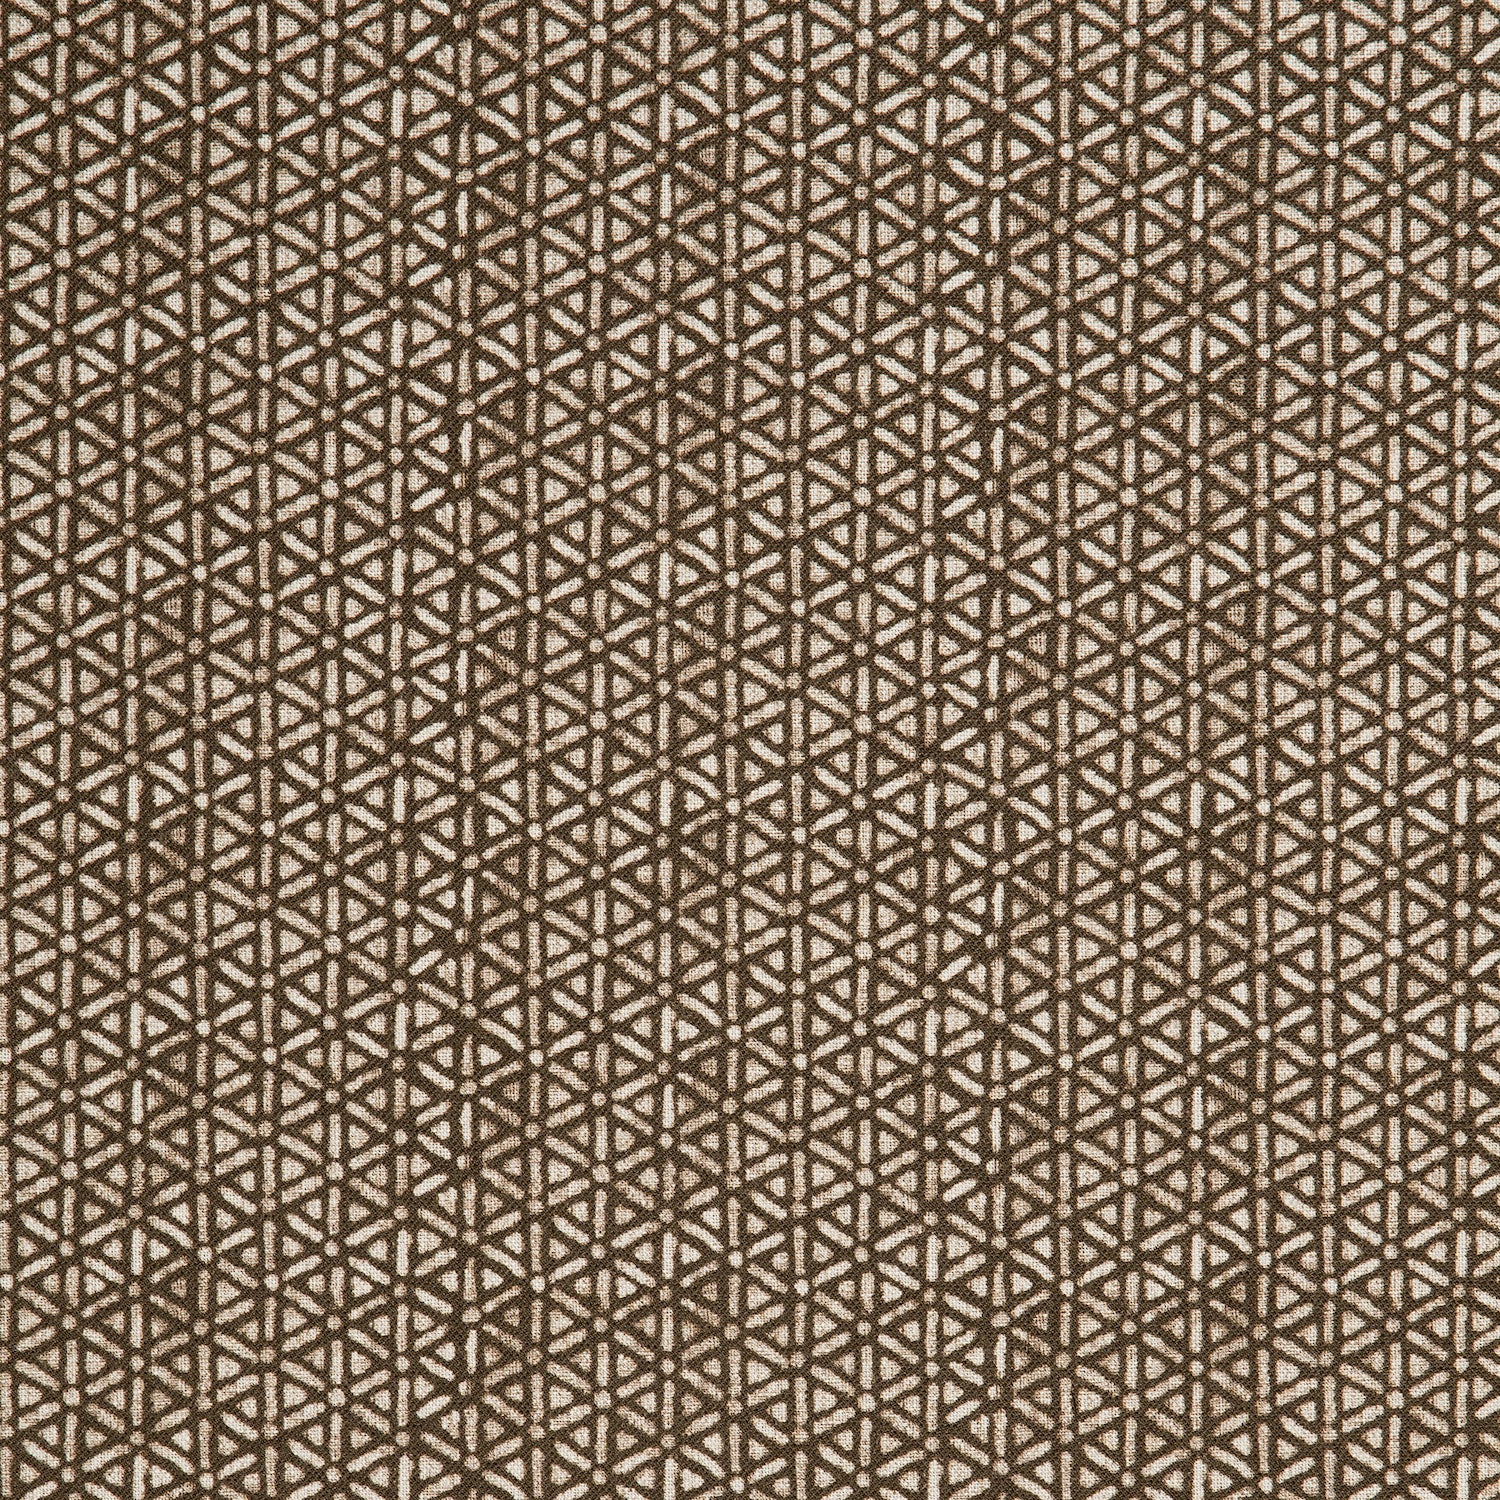 Detail of a linen fabric in a detailed geometric pattern in white on a dark brown field.